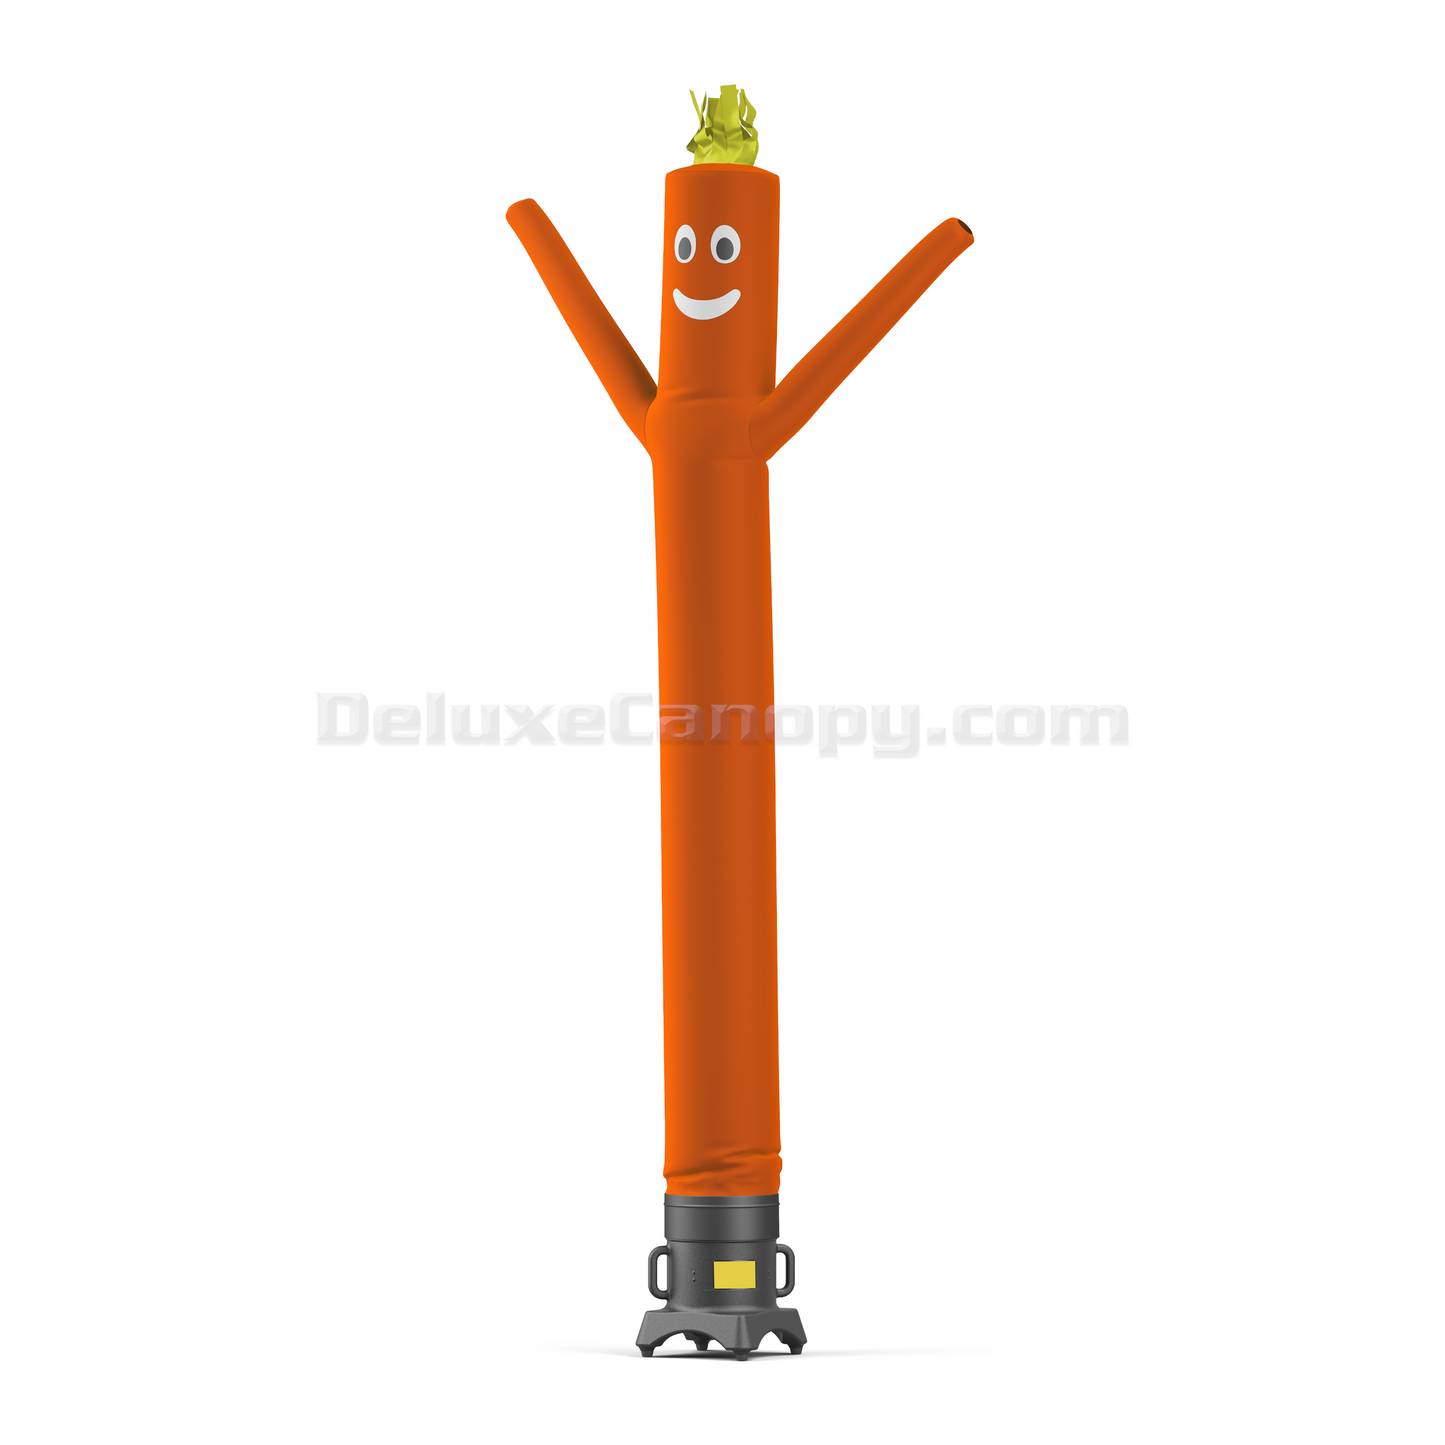 Air Dancers® Inflatable Tube Man | Deluxe Canopy